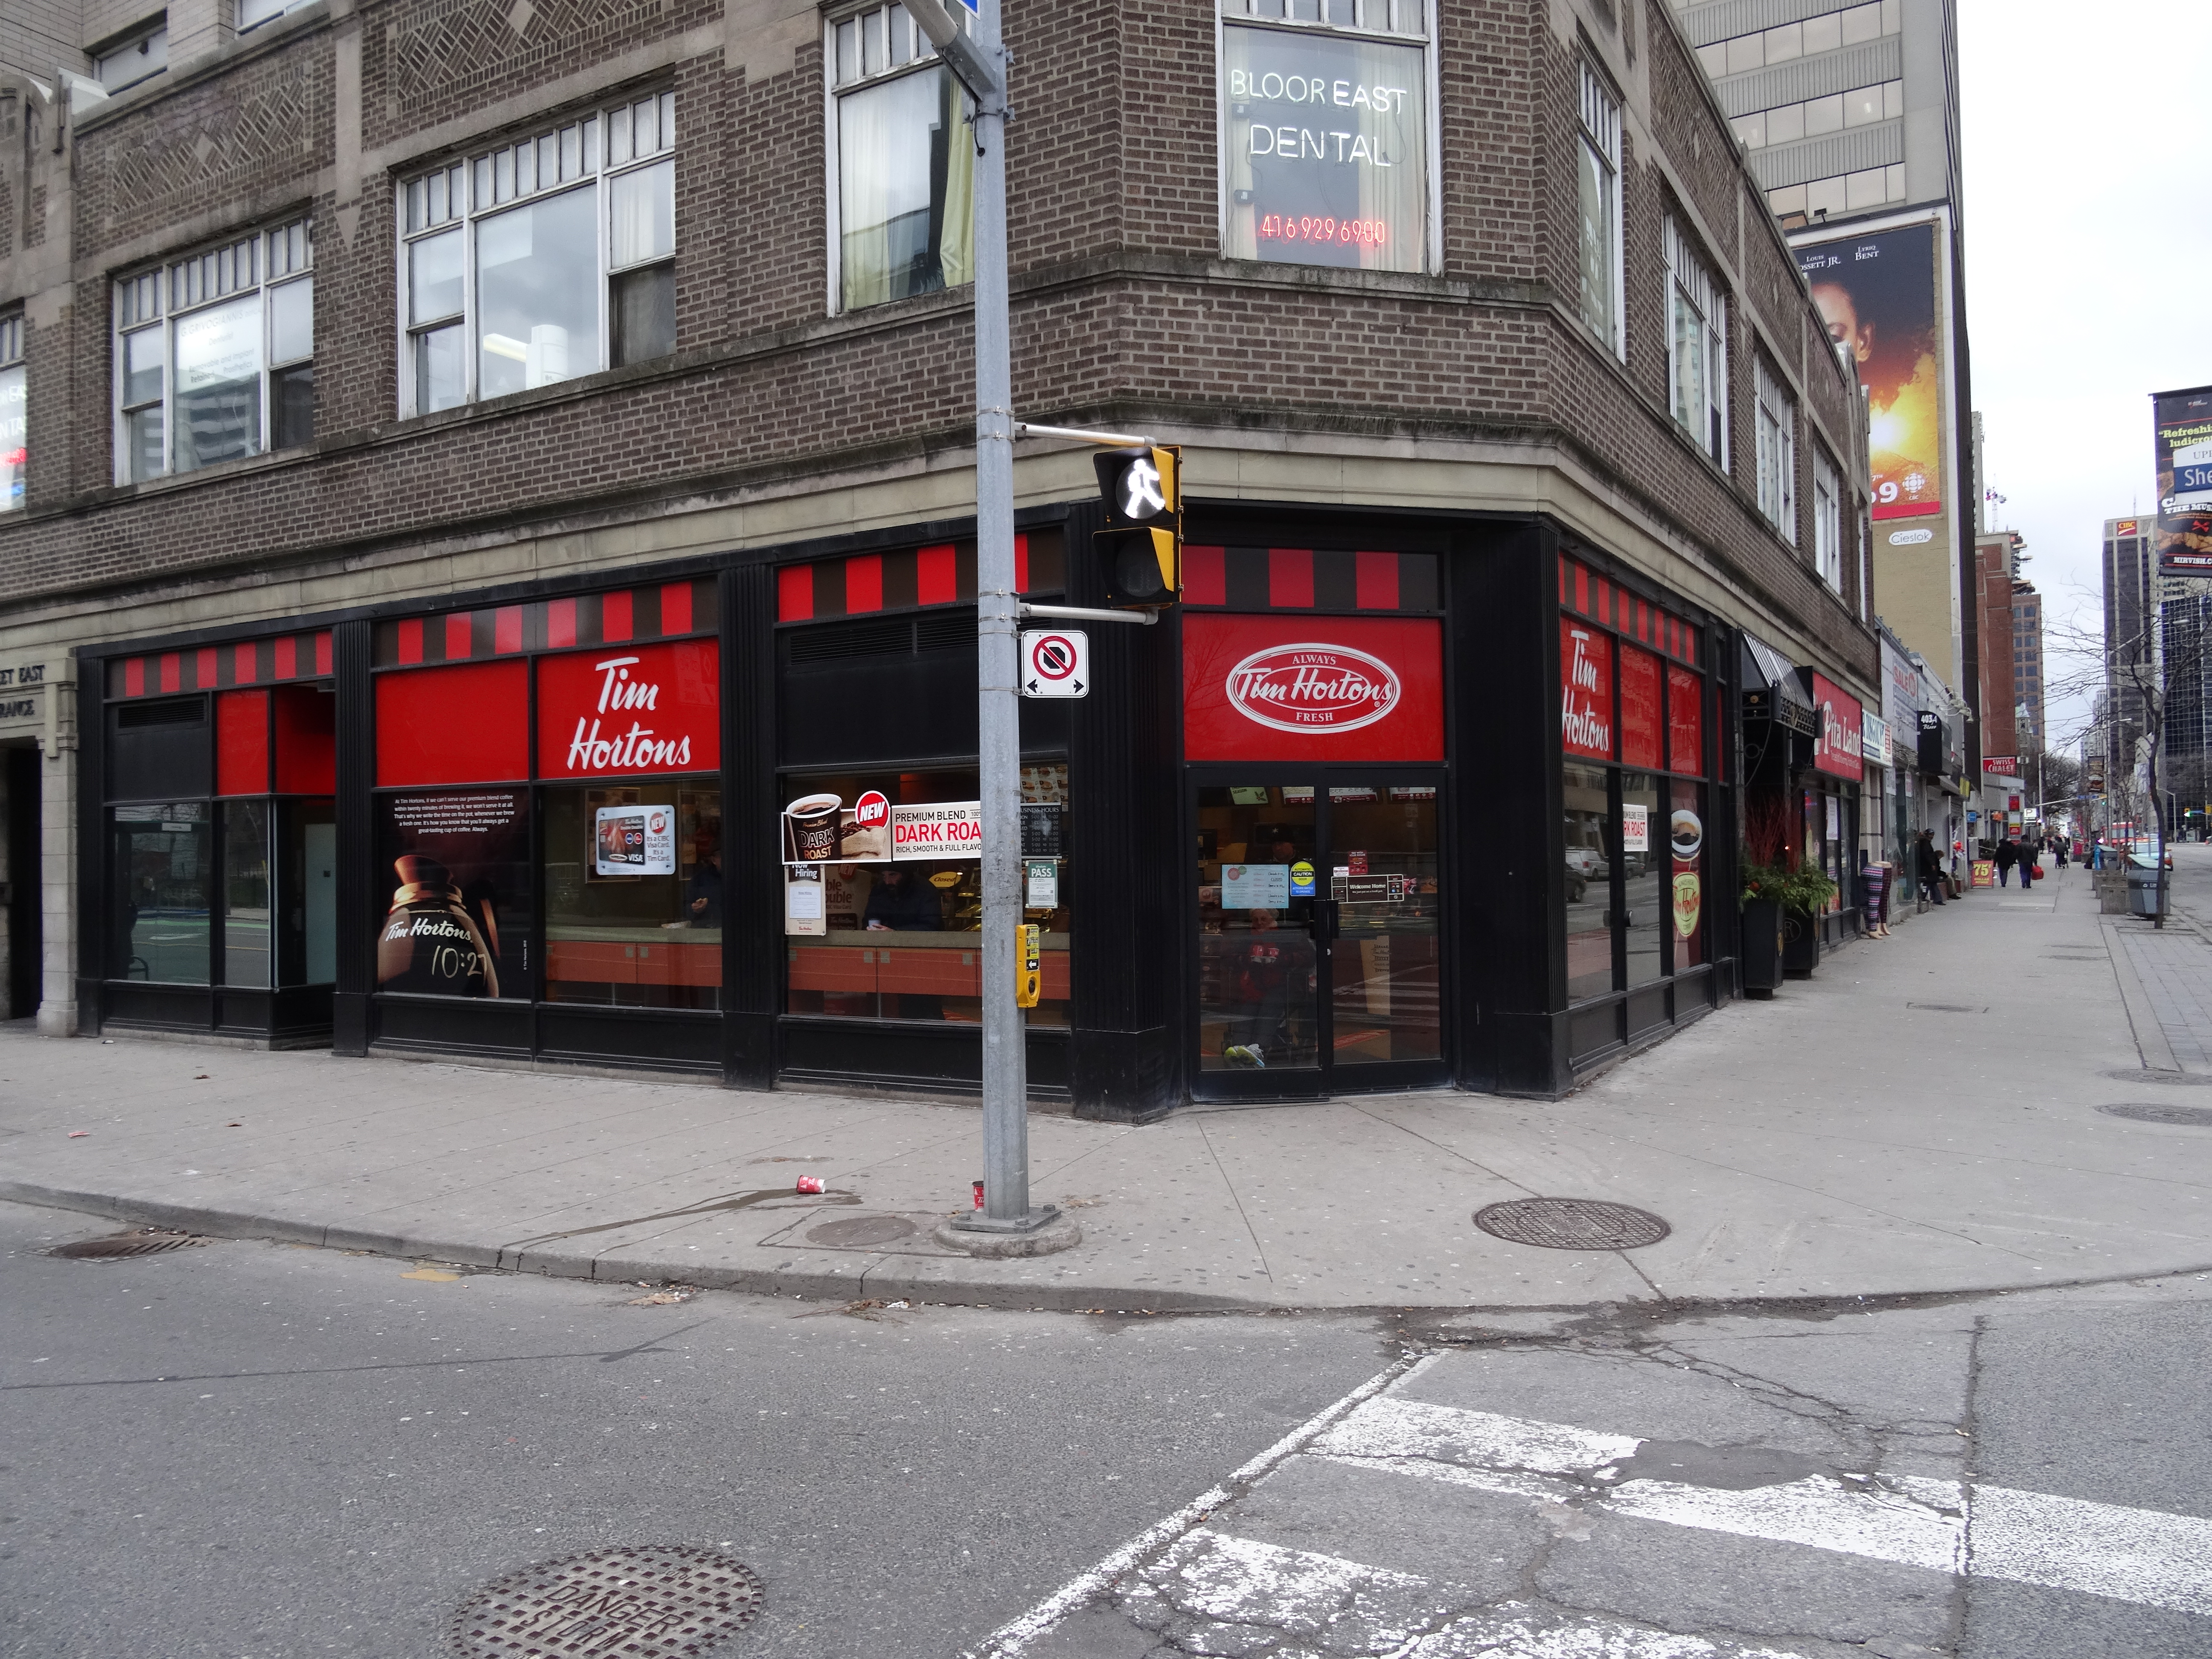 File:Tim Hortons, SW corner of Sherbourne and 2014 12 28 - panoramio.jpg - Wikimedia Commons